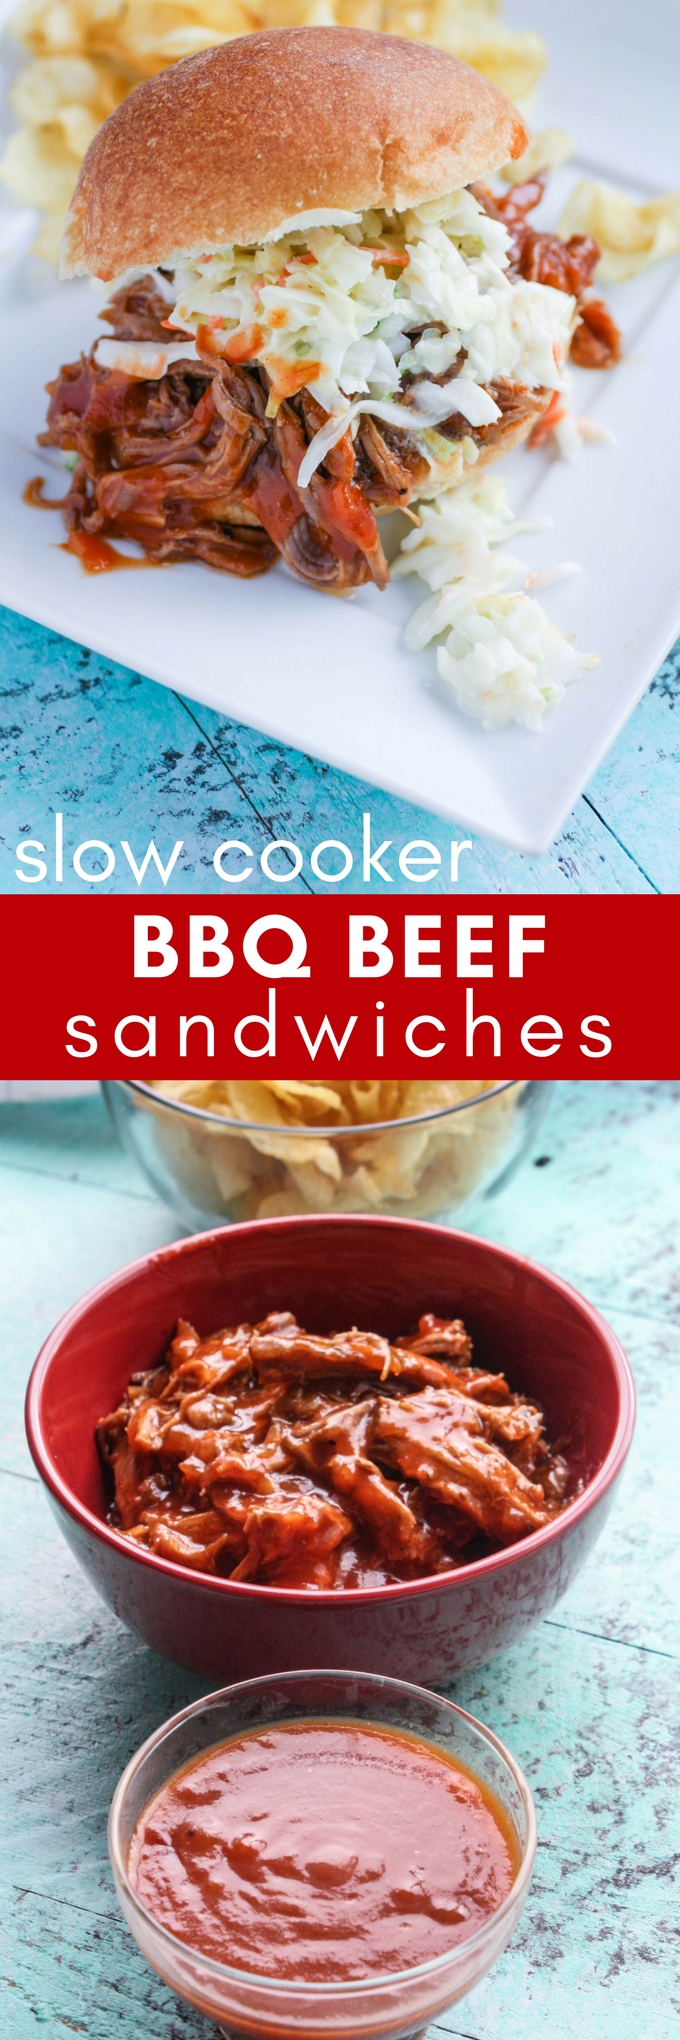 Slow Cooker BBQ Beef Sandwiches make a delicious, fuss-free meal. You'll love these sandwiches and the tasty bbq sauce that goes with them!